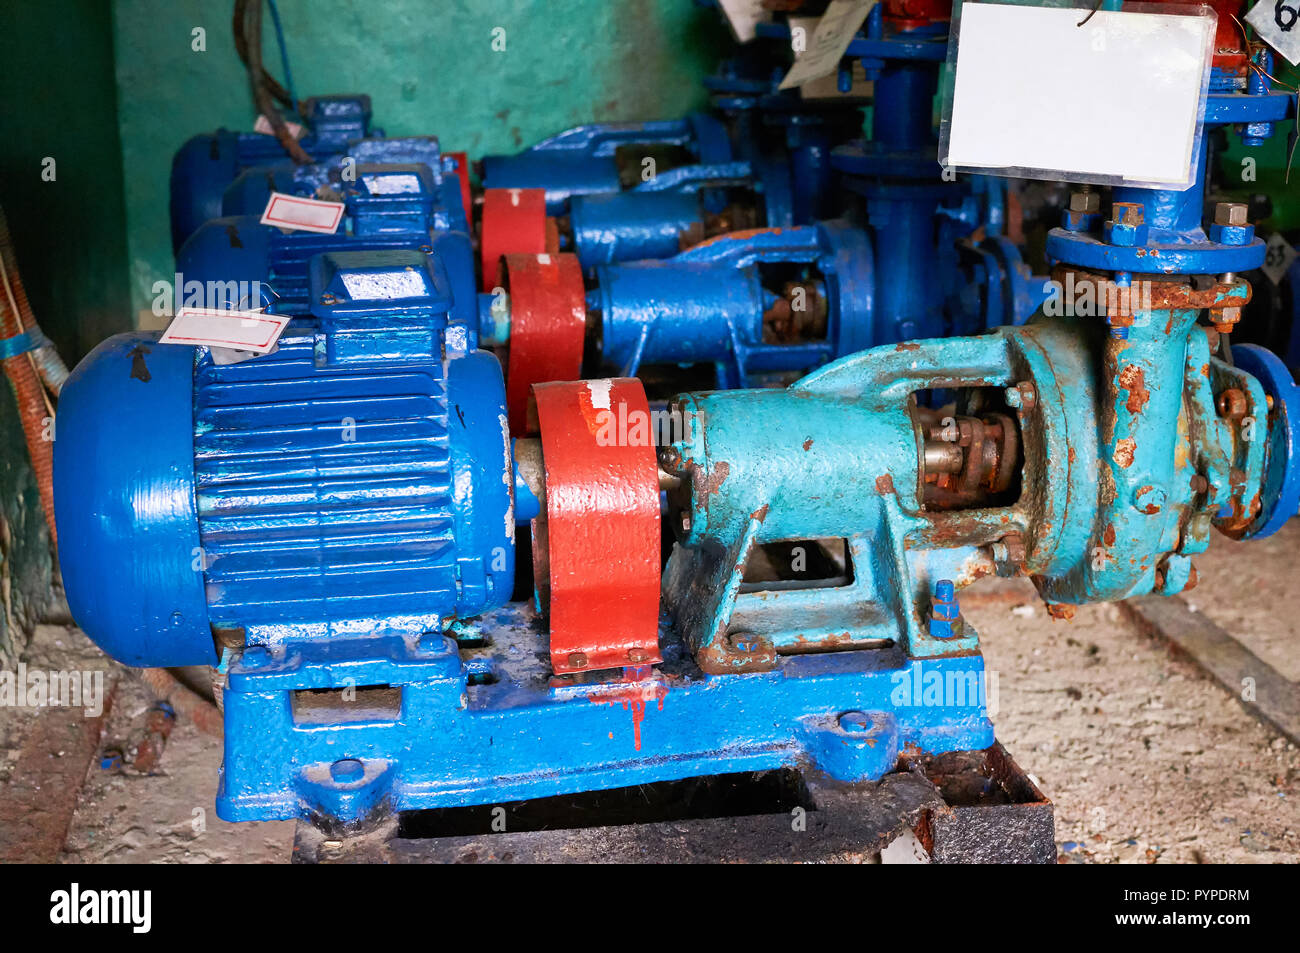 Blue electric water pump, 3D illustration Stock Photo - Alamy